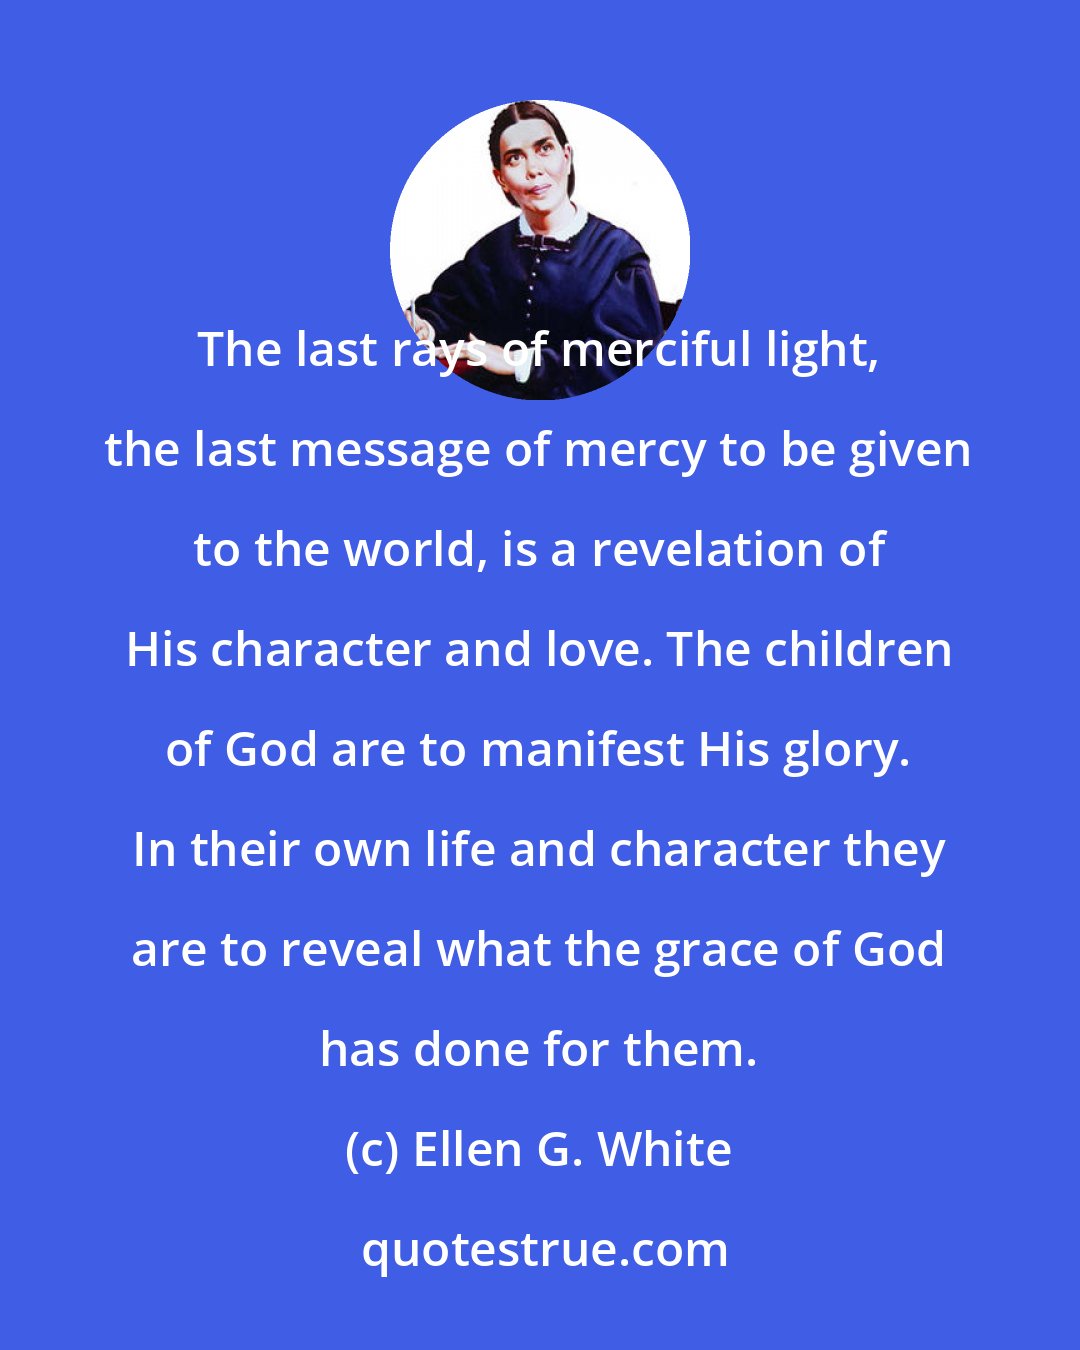 Ellen G. White: The last rays of merciful light, the last message of mercy to be given to the world, is a revelation of His character and love. The children of God are to manifest His glory. In their own life and character they are to reveal what the grace of God has done for them.